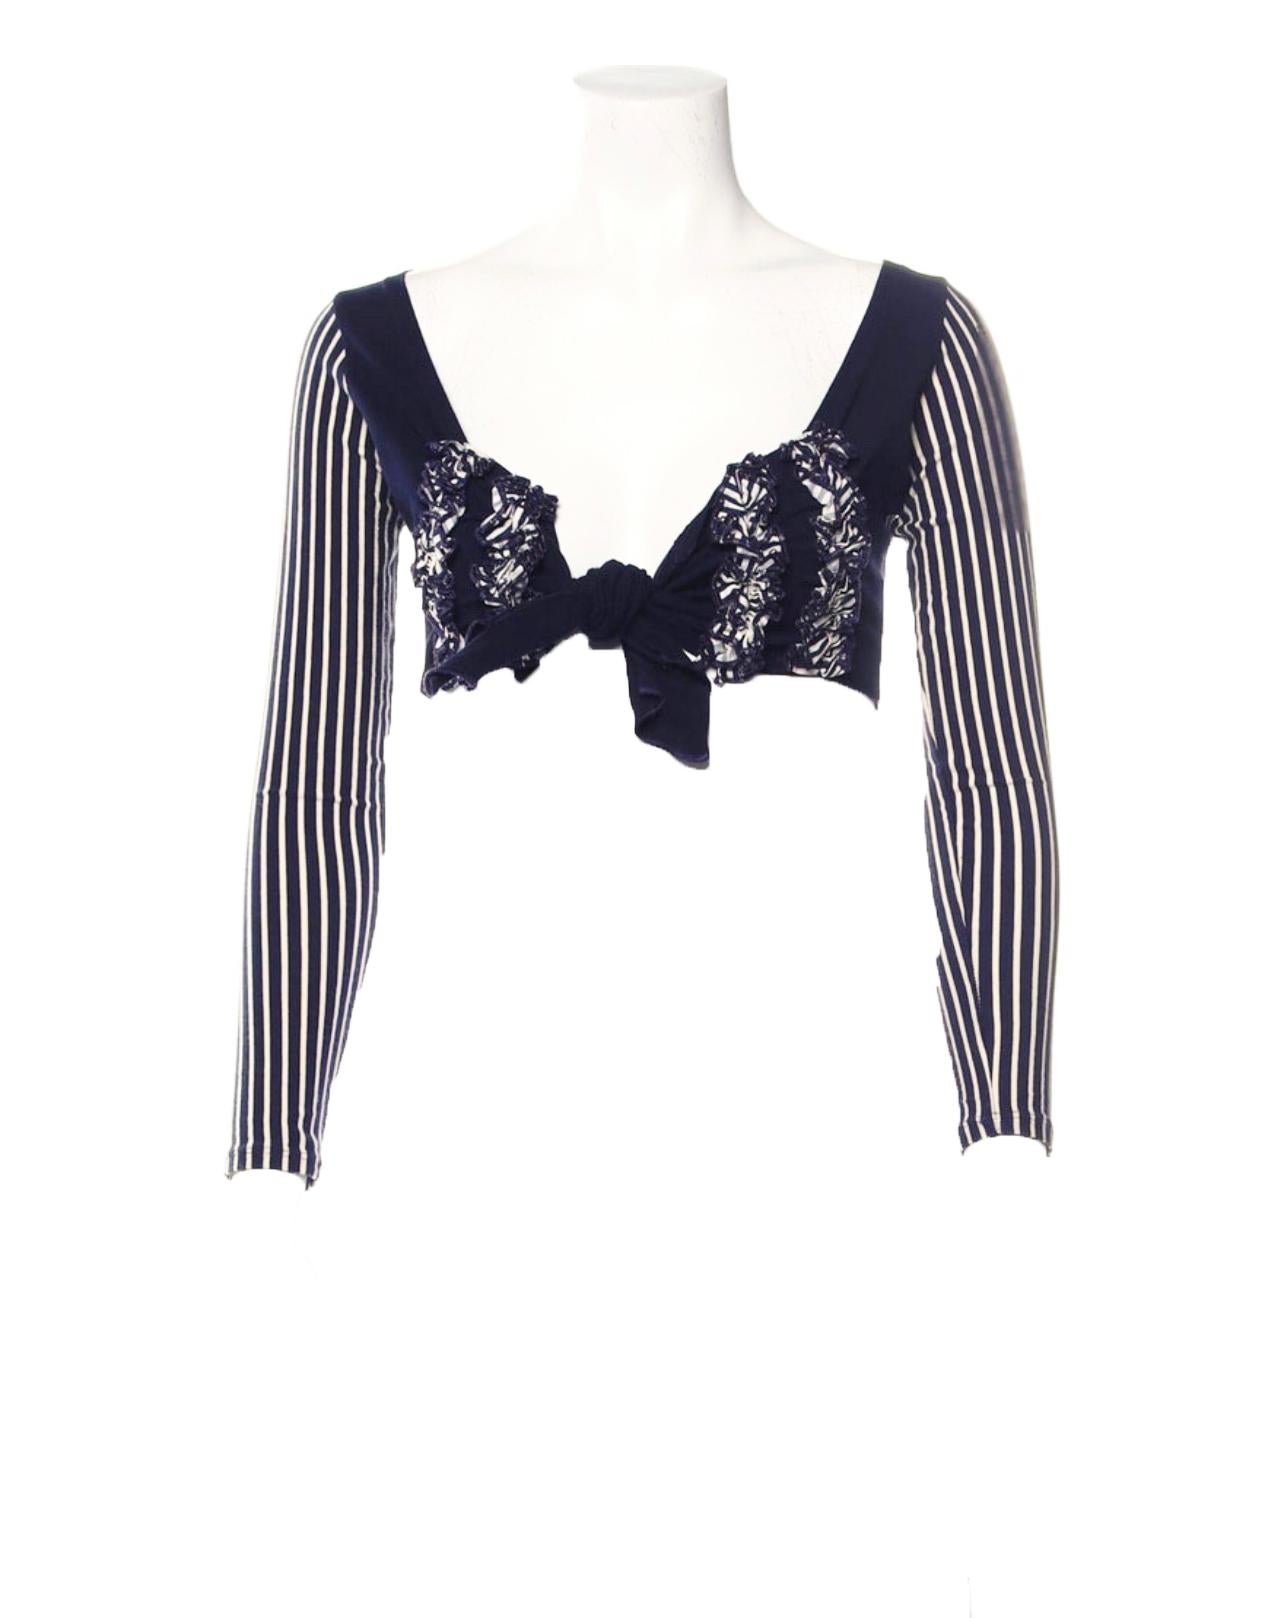 1990s Jean Paul Gaultier Crop Top with striped sleeves and ruffle accents
Condition :Excellent 
Size S/ 